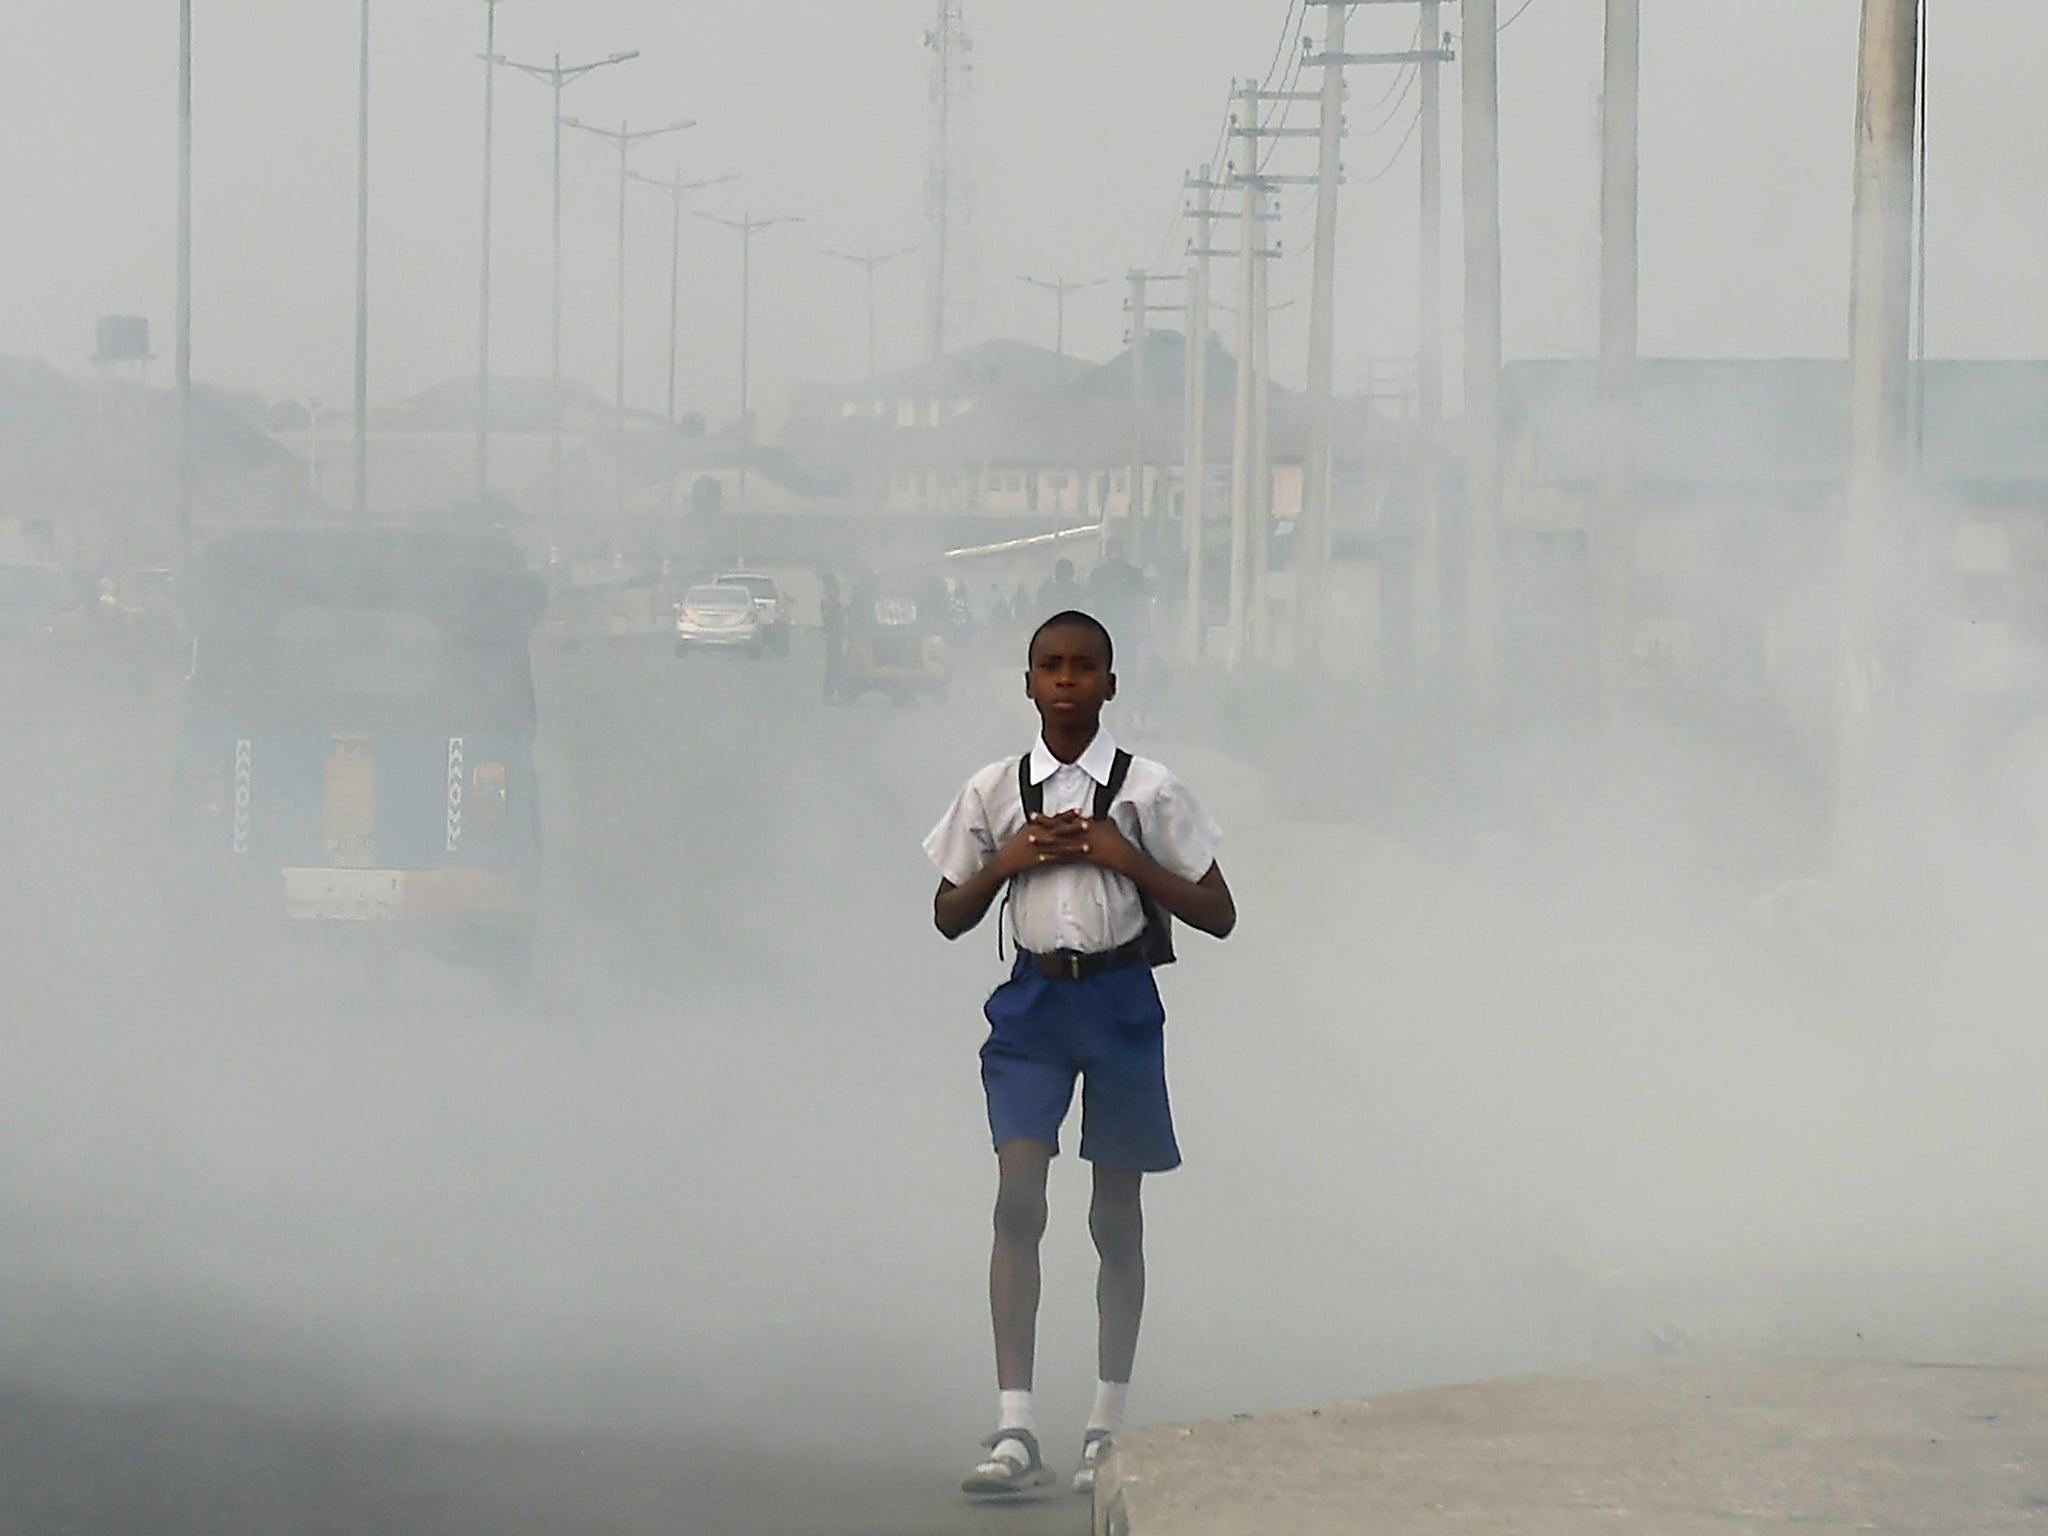 Fumes emitted from a dump in the city of Port Harcourt, Rivers State put the health of residents at risk